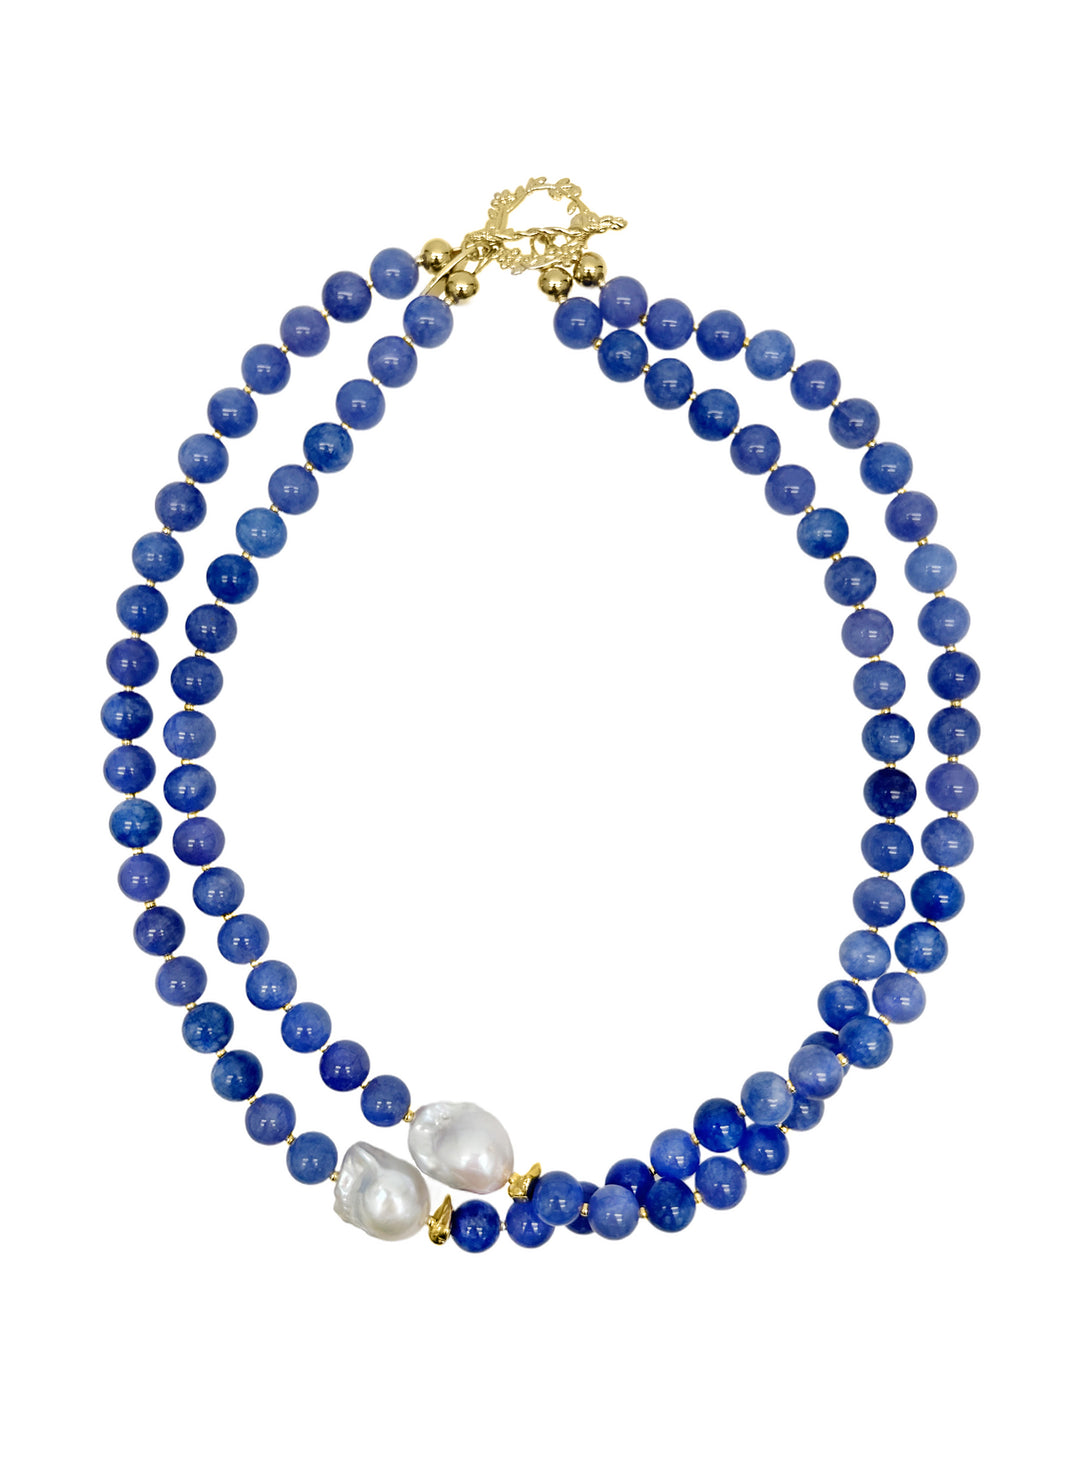 Blue Jade with Baroque Pearls Double Layers Necklace LN034 - FARRA